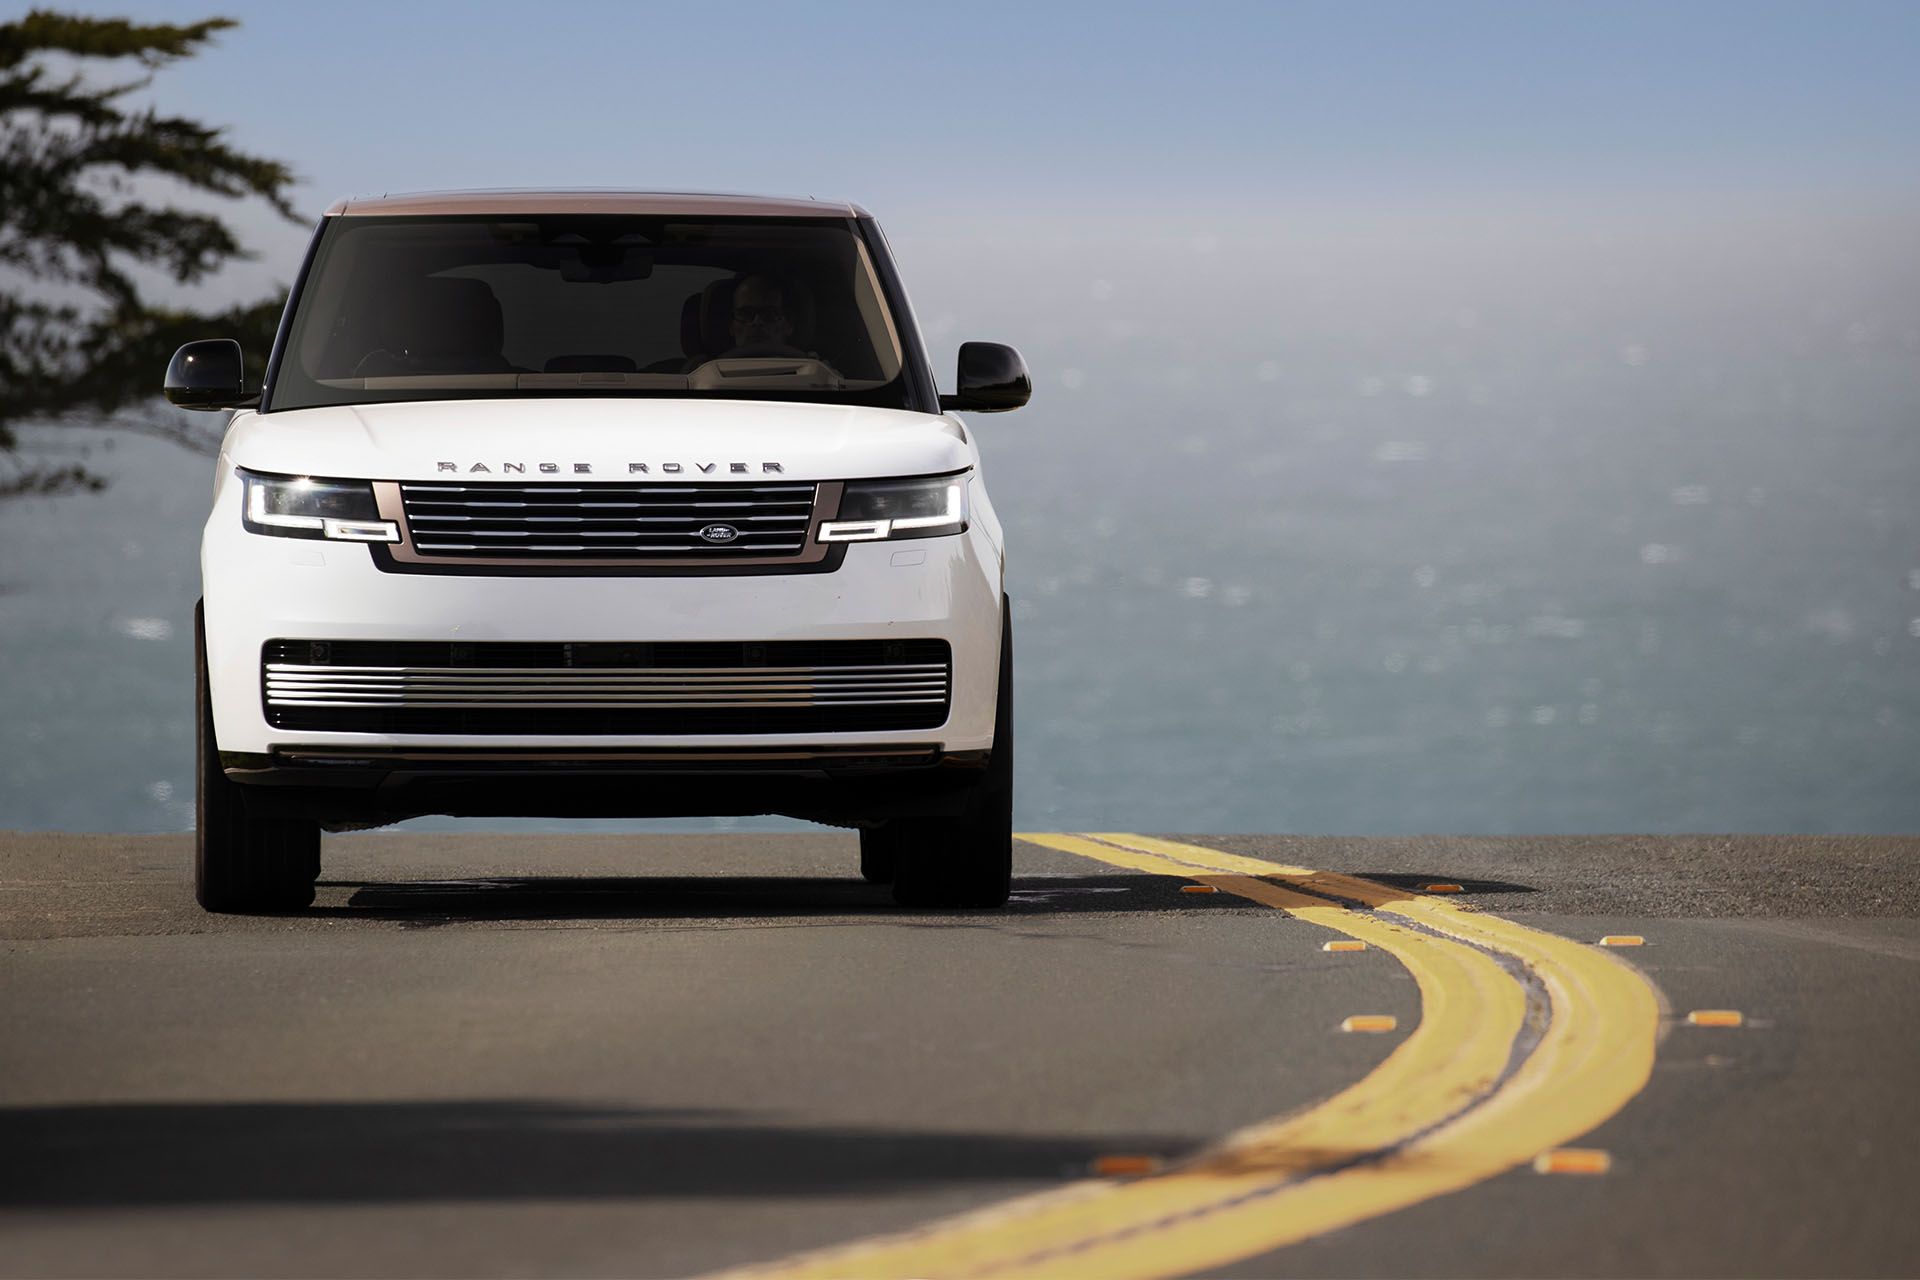 The 2022 Range Rover SV just set and raised the luxury SUV bar